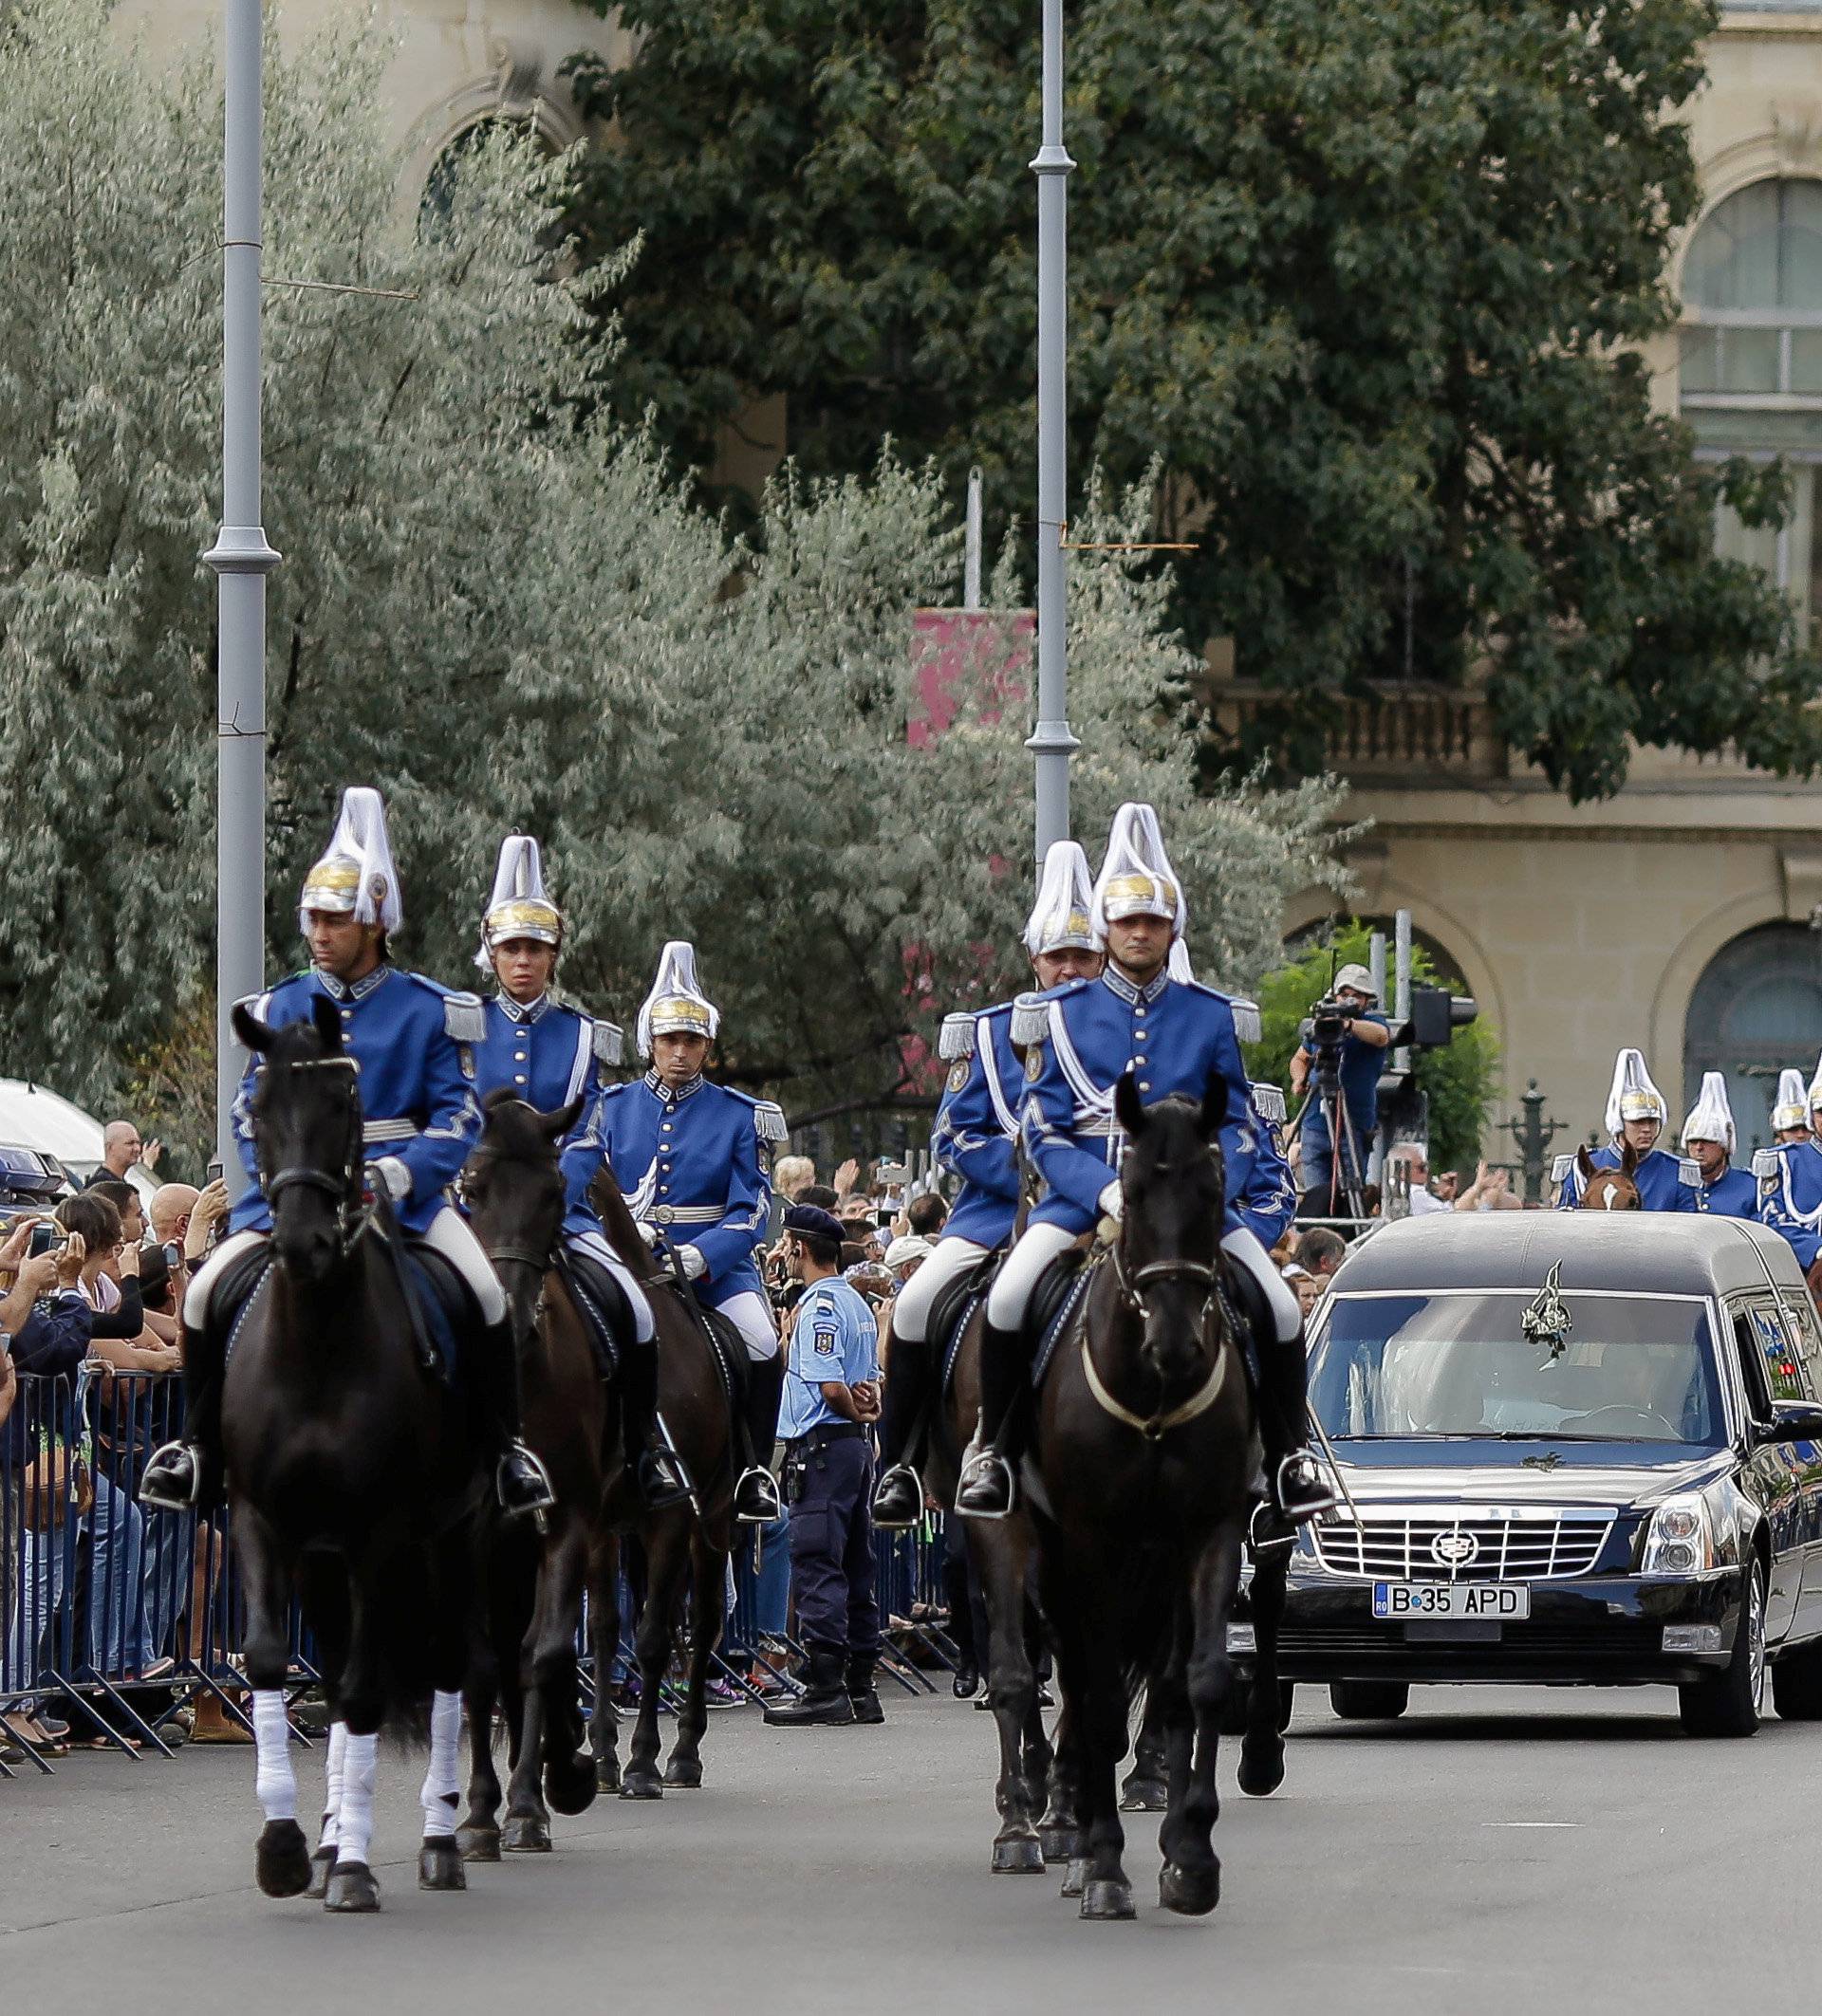 Romanian gendarmes on horseback escort a hearse transporting the coffin of the late Anne of Romania, wife of Romania's former King Michael, in downtown Bucharest